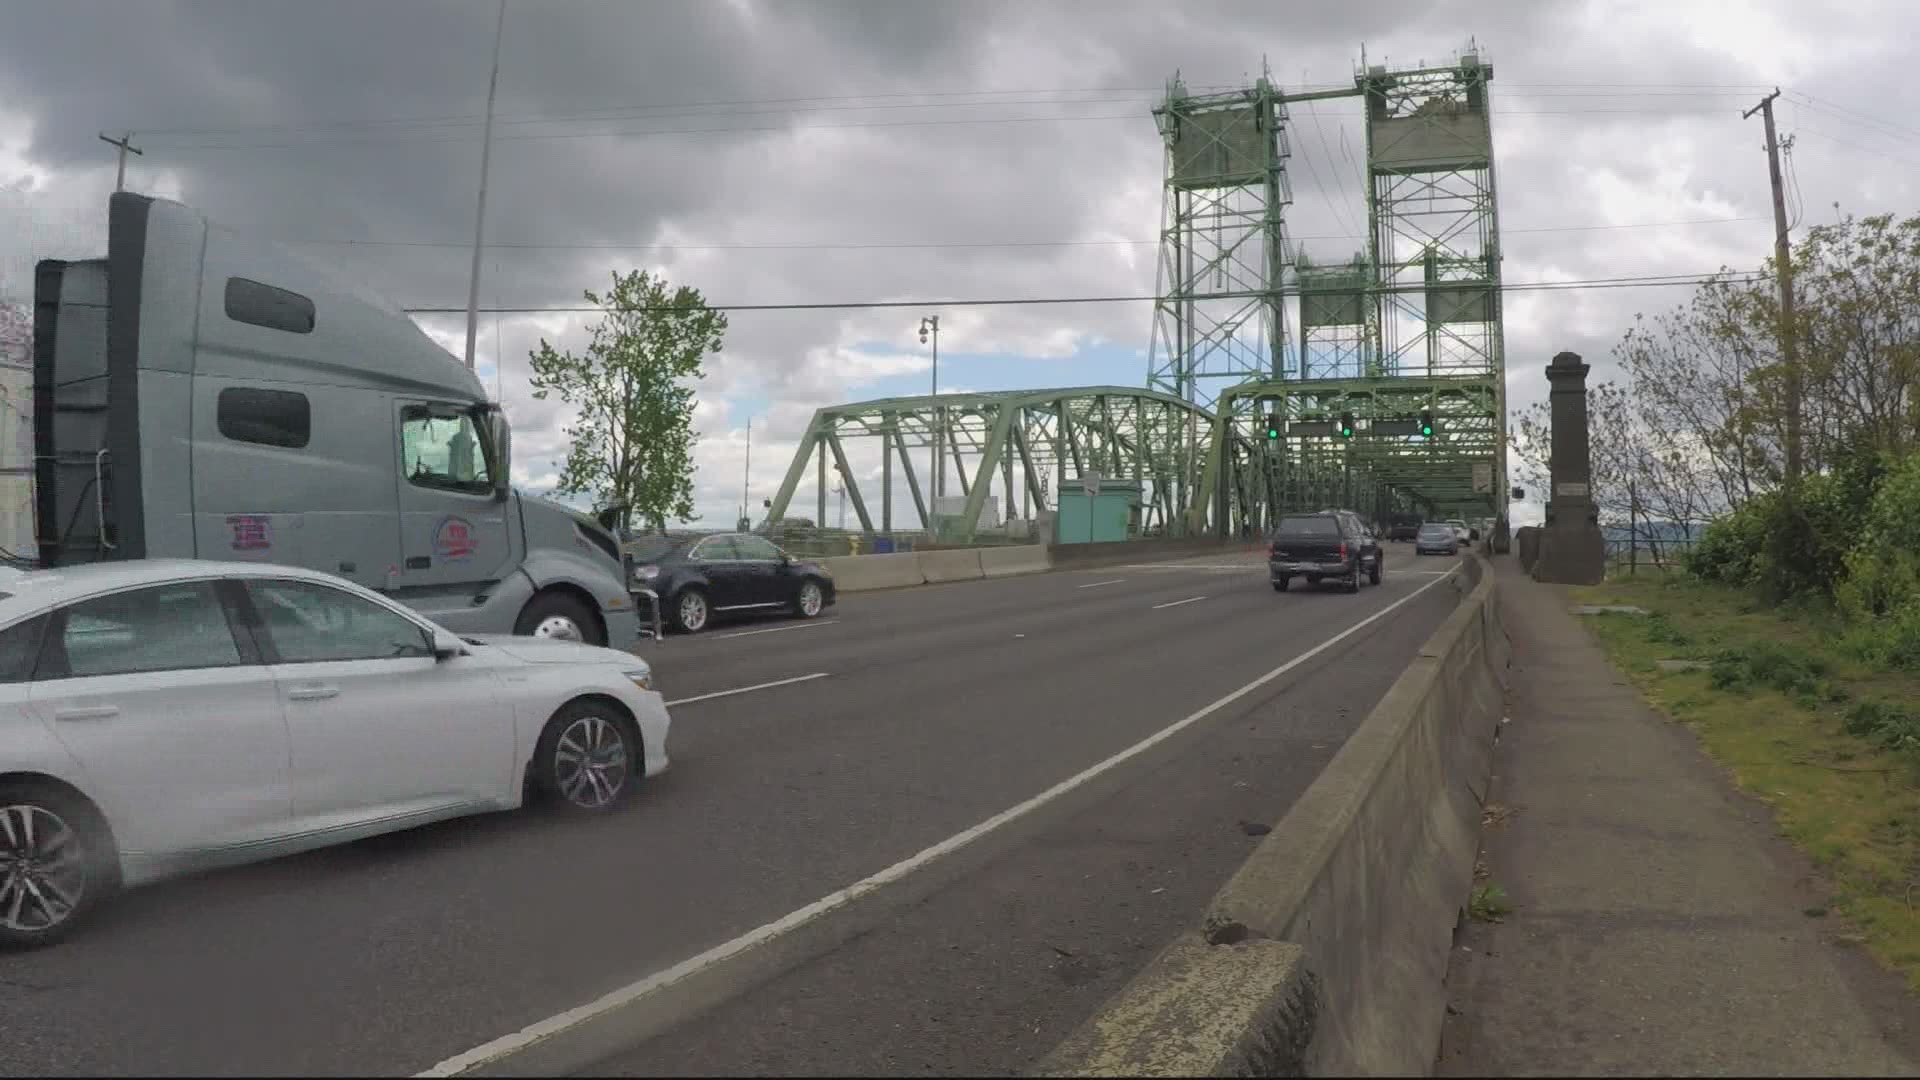 Plans to build a new I-5 bridge have come and gone over the years. But as Tim Gordon reports, there is a new timeline with plans to get the job done.